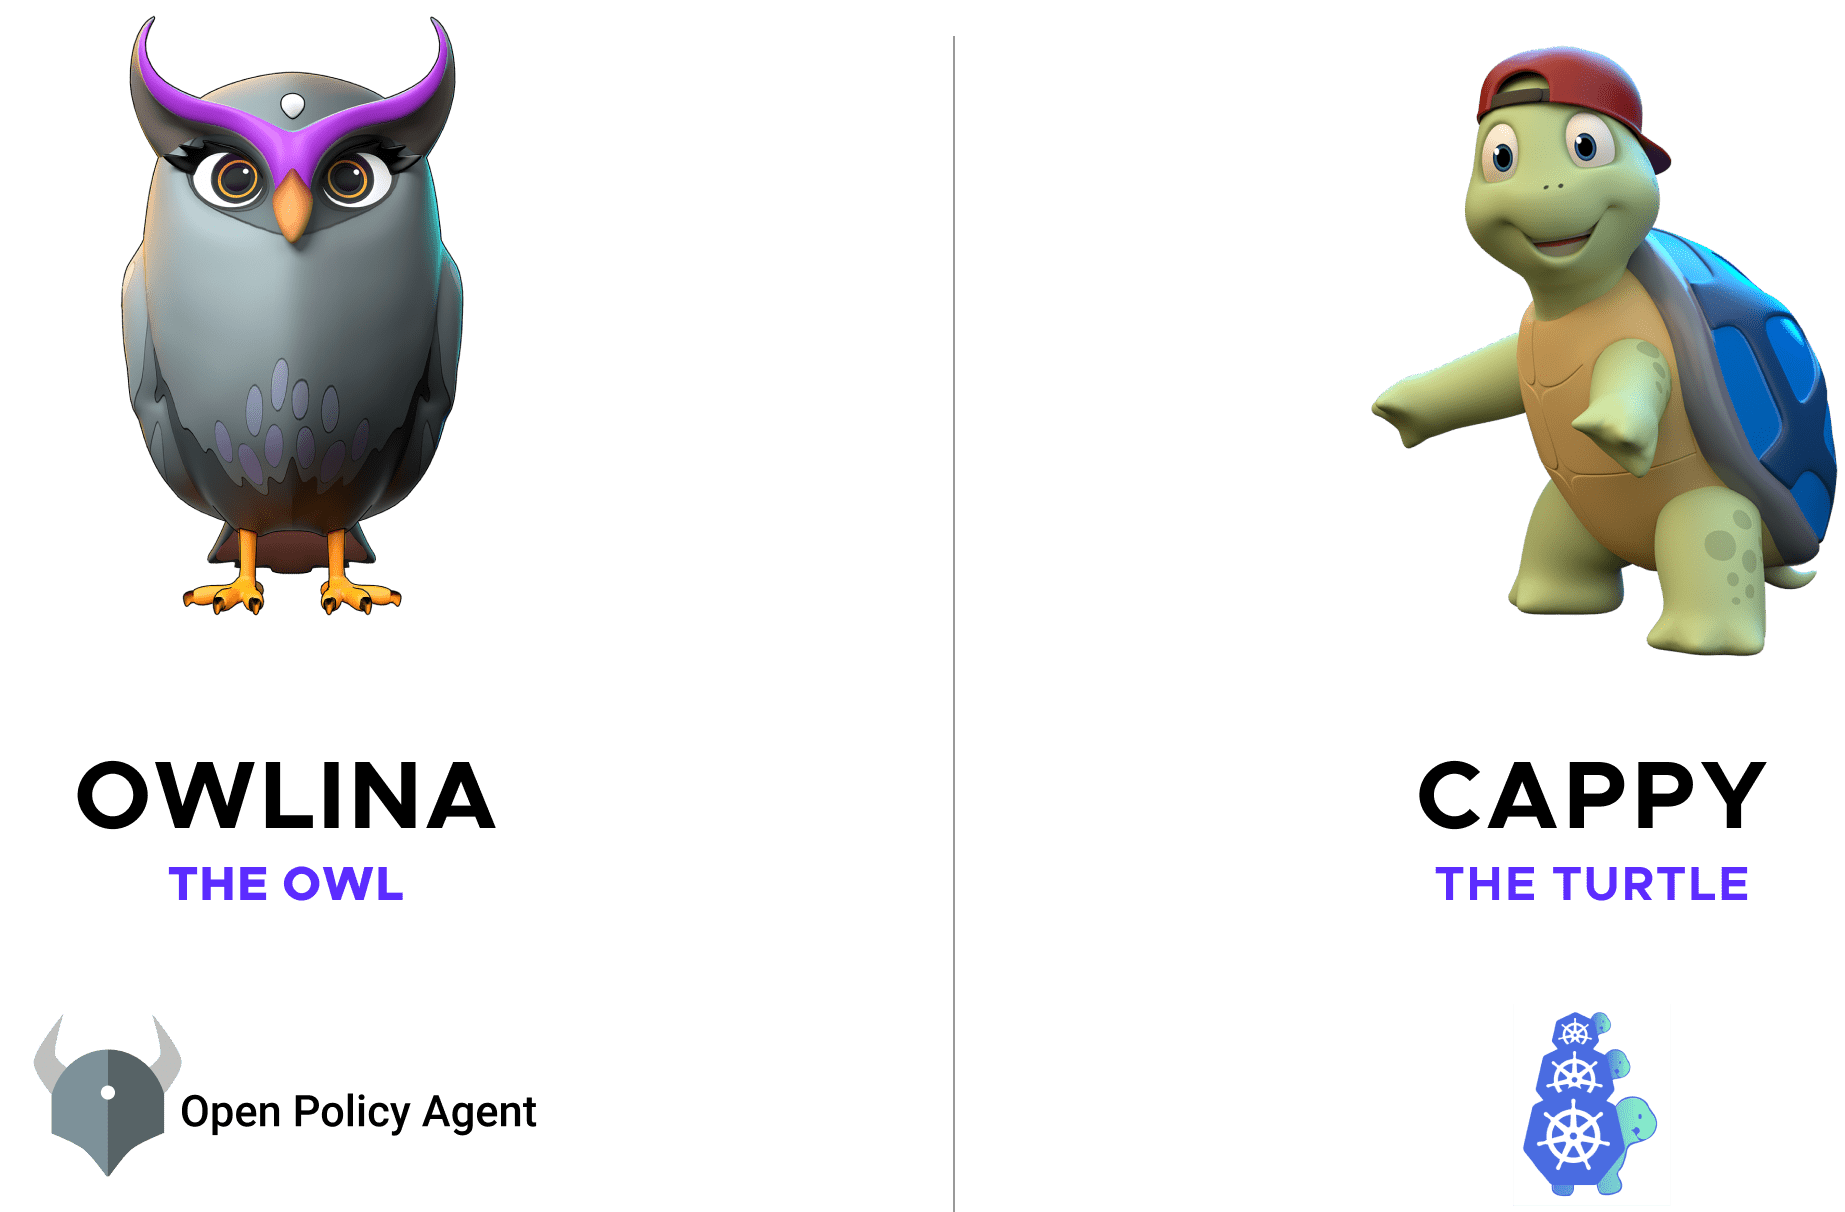 New Phippy characters, Owlina The Owl, donated by Open Policy Agent and Cappy The Turtle